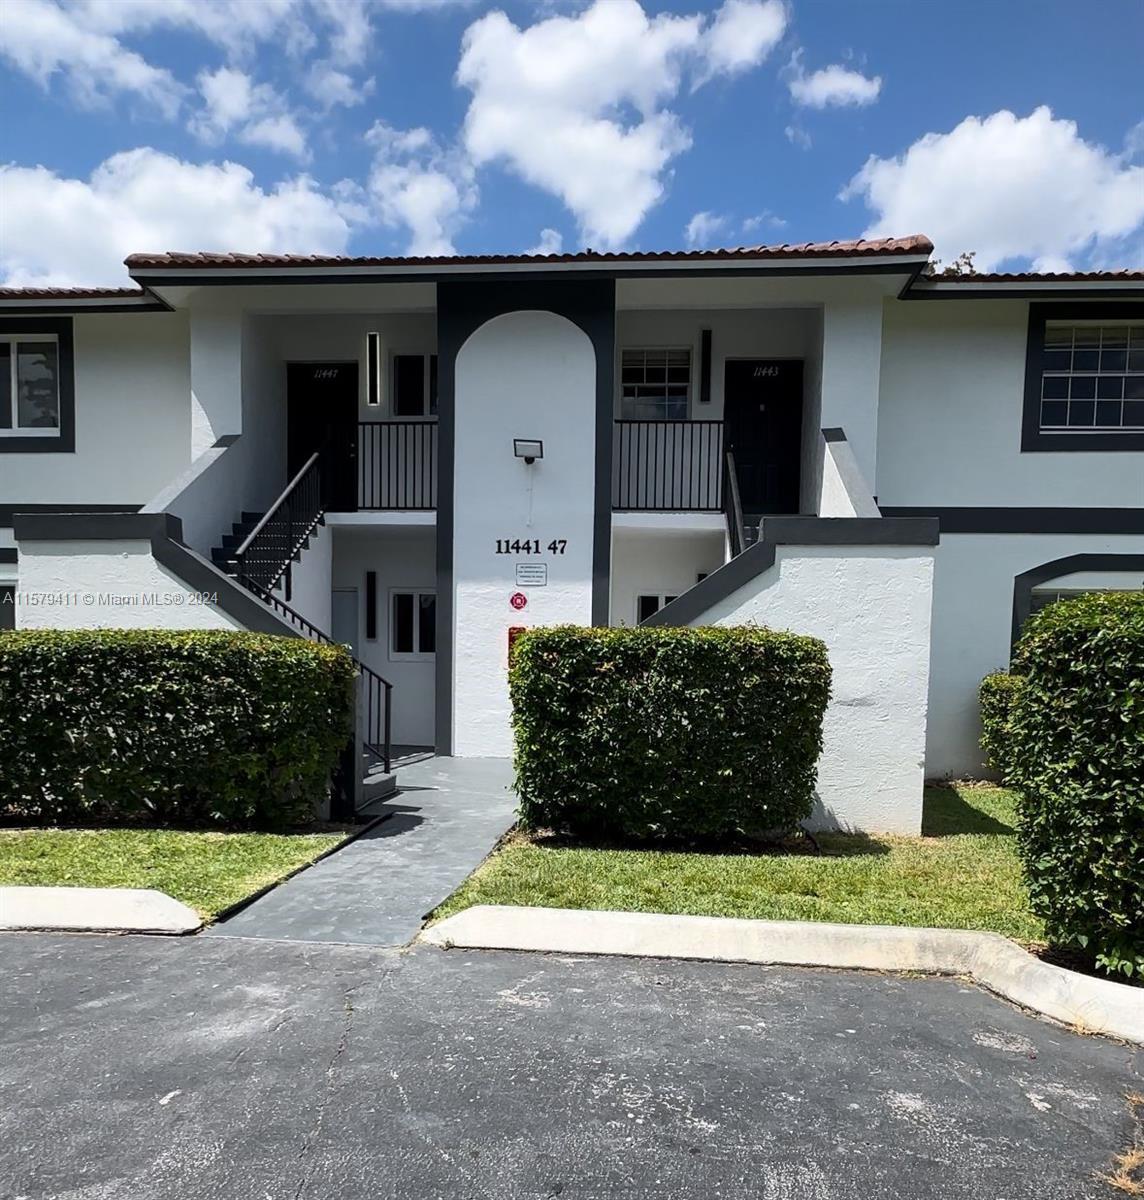 Photo of 11441-11447 NW 45th St #11445 in Coral Springs, FL